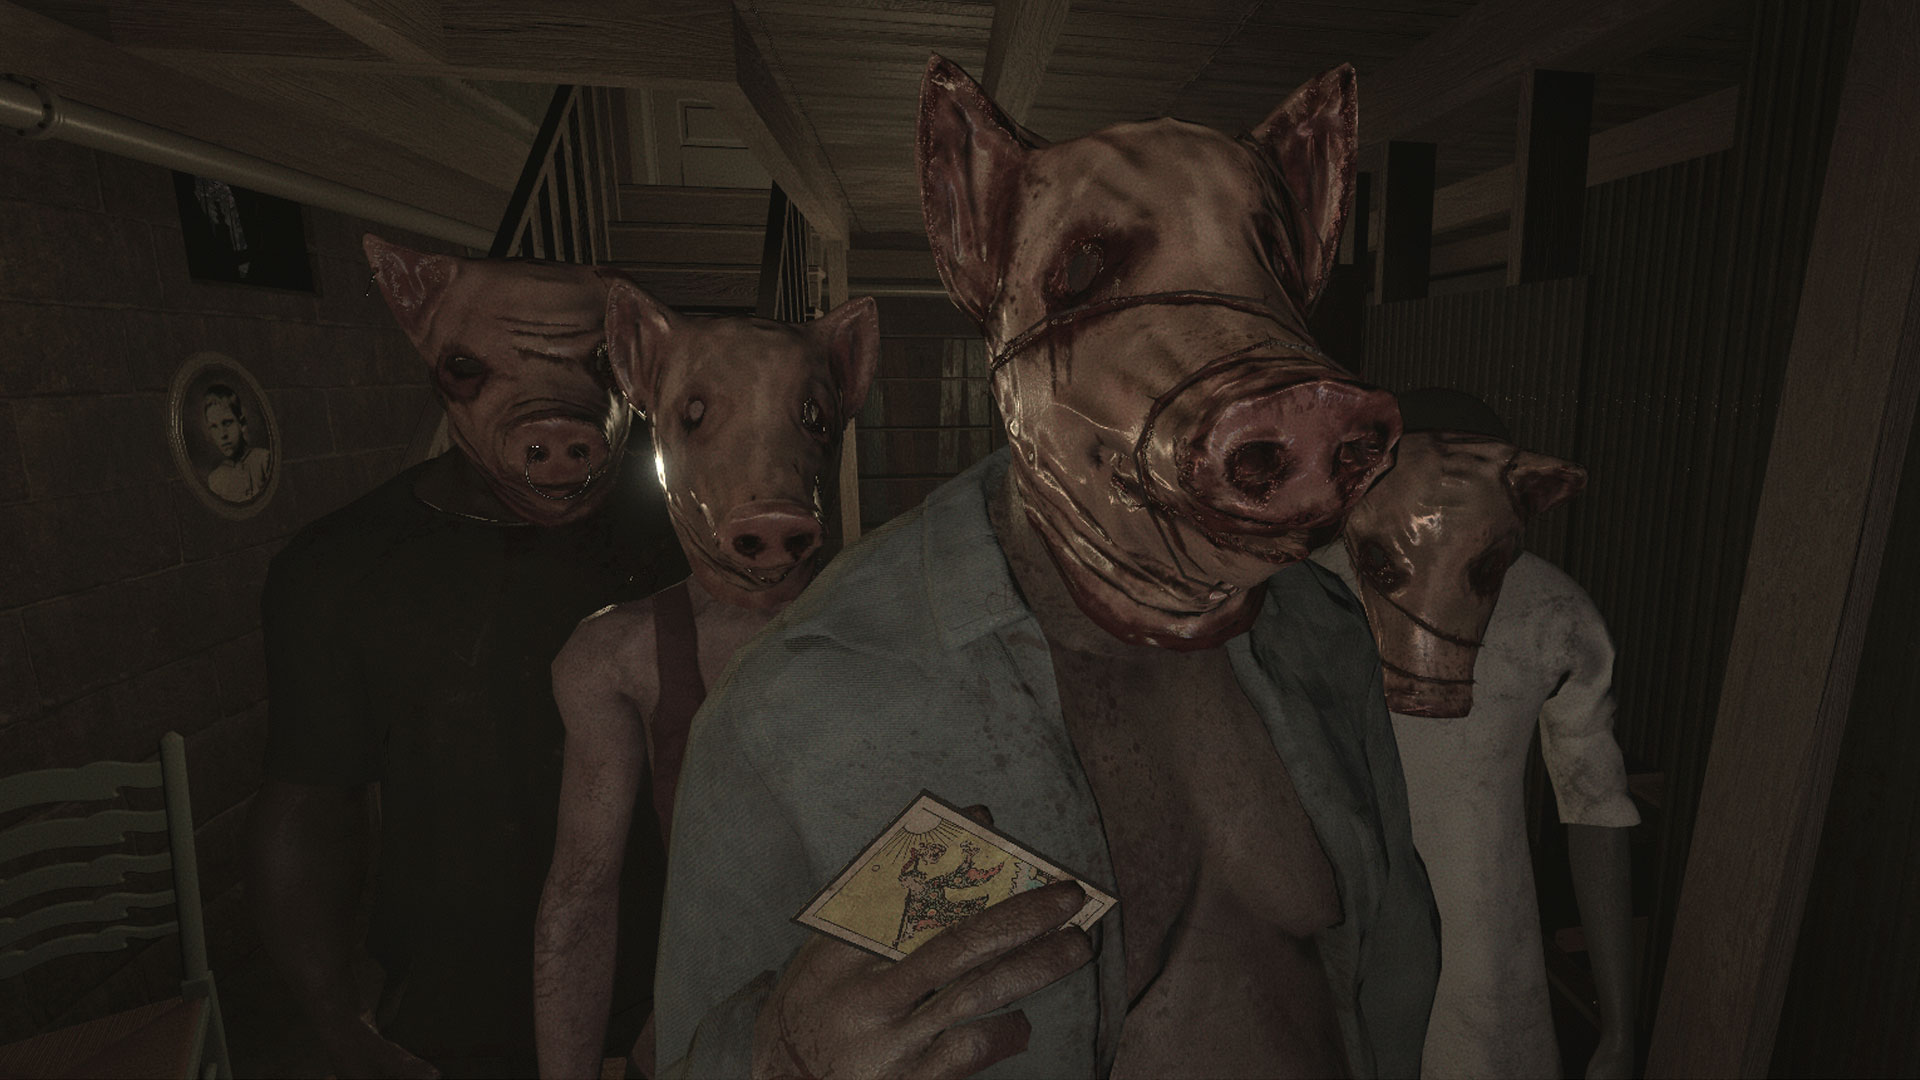 The main enemies of The Swine wearing pig masks and holding tarot cards